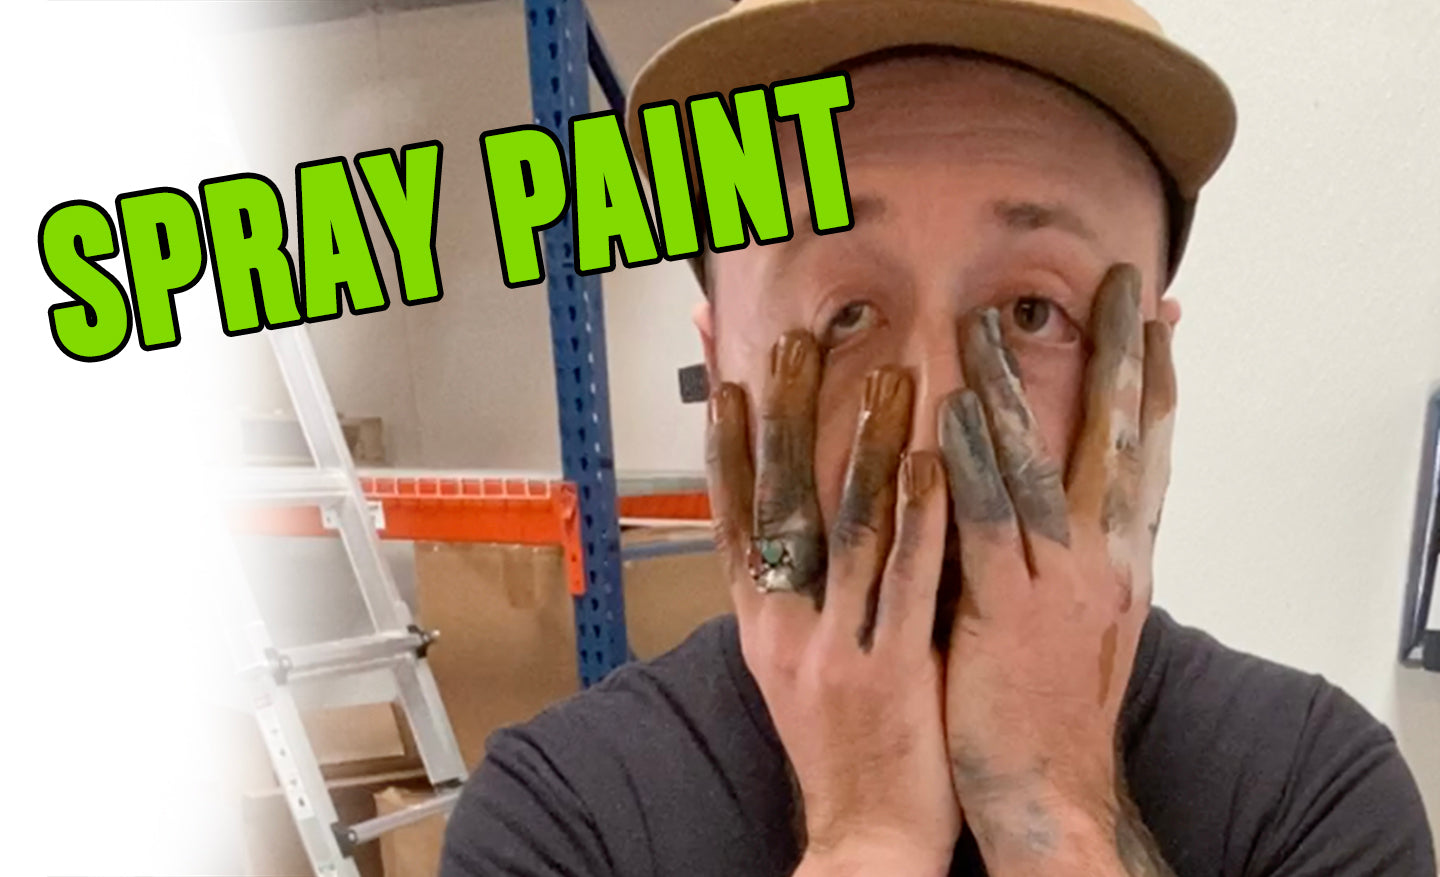 How To Get Spray Paint Off Skin and Hands - Remove Spray Paint